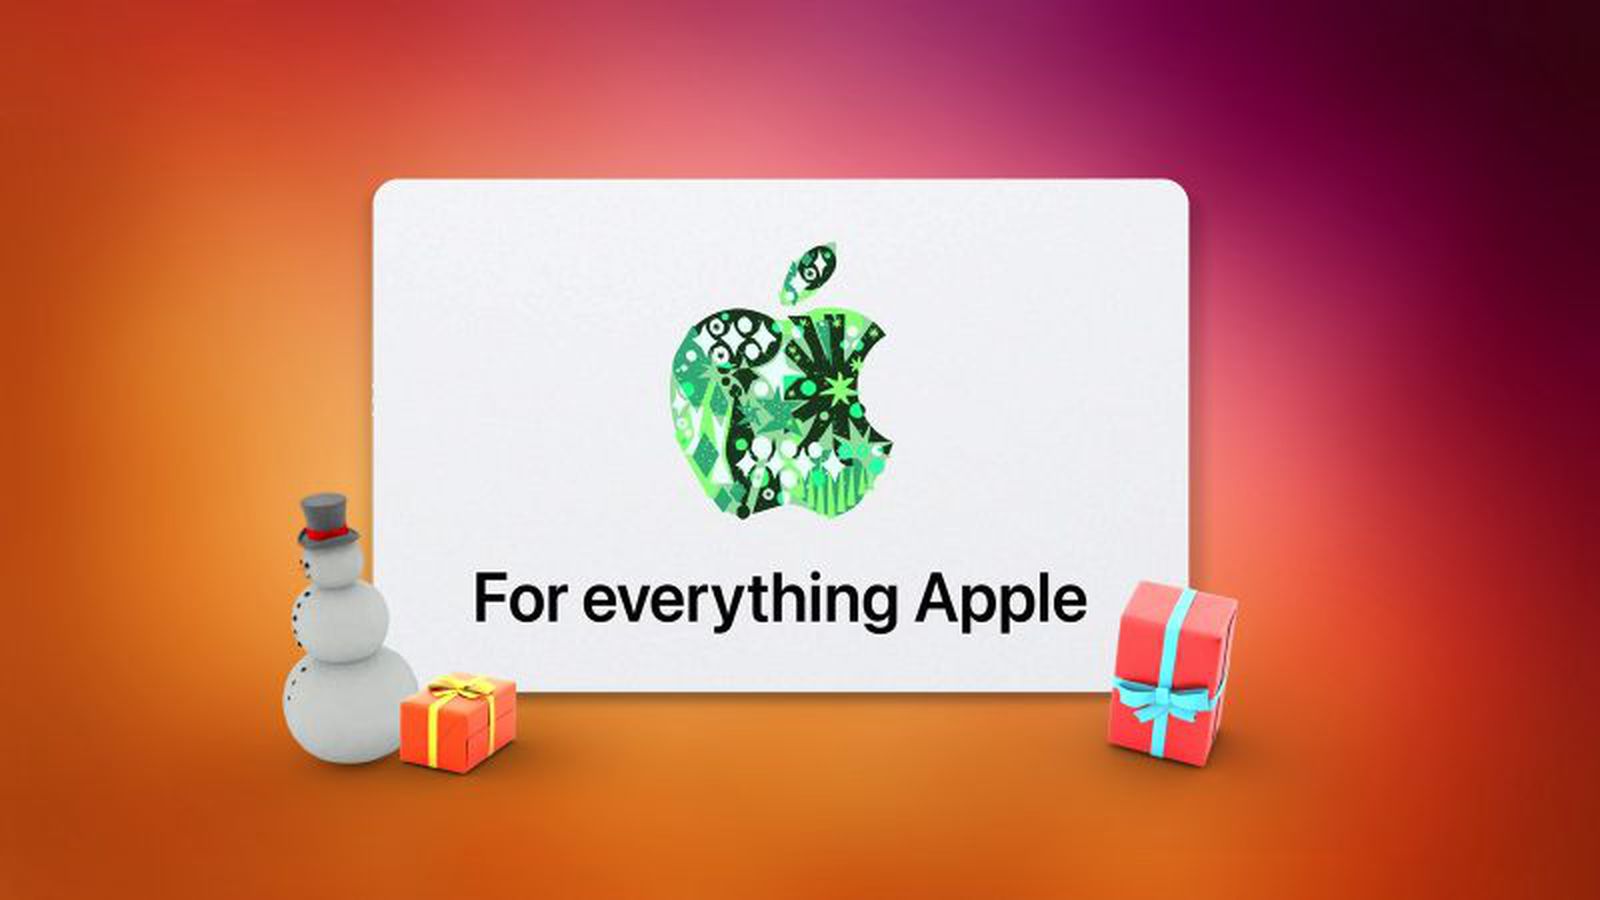 What to Buy the You Unwrapped - With Gift Card Apple MacRumors